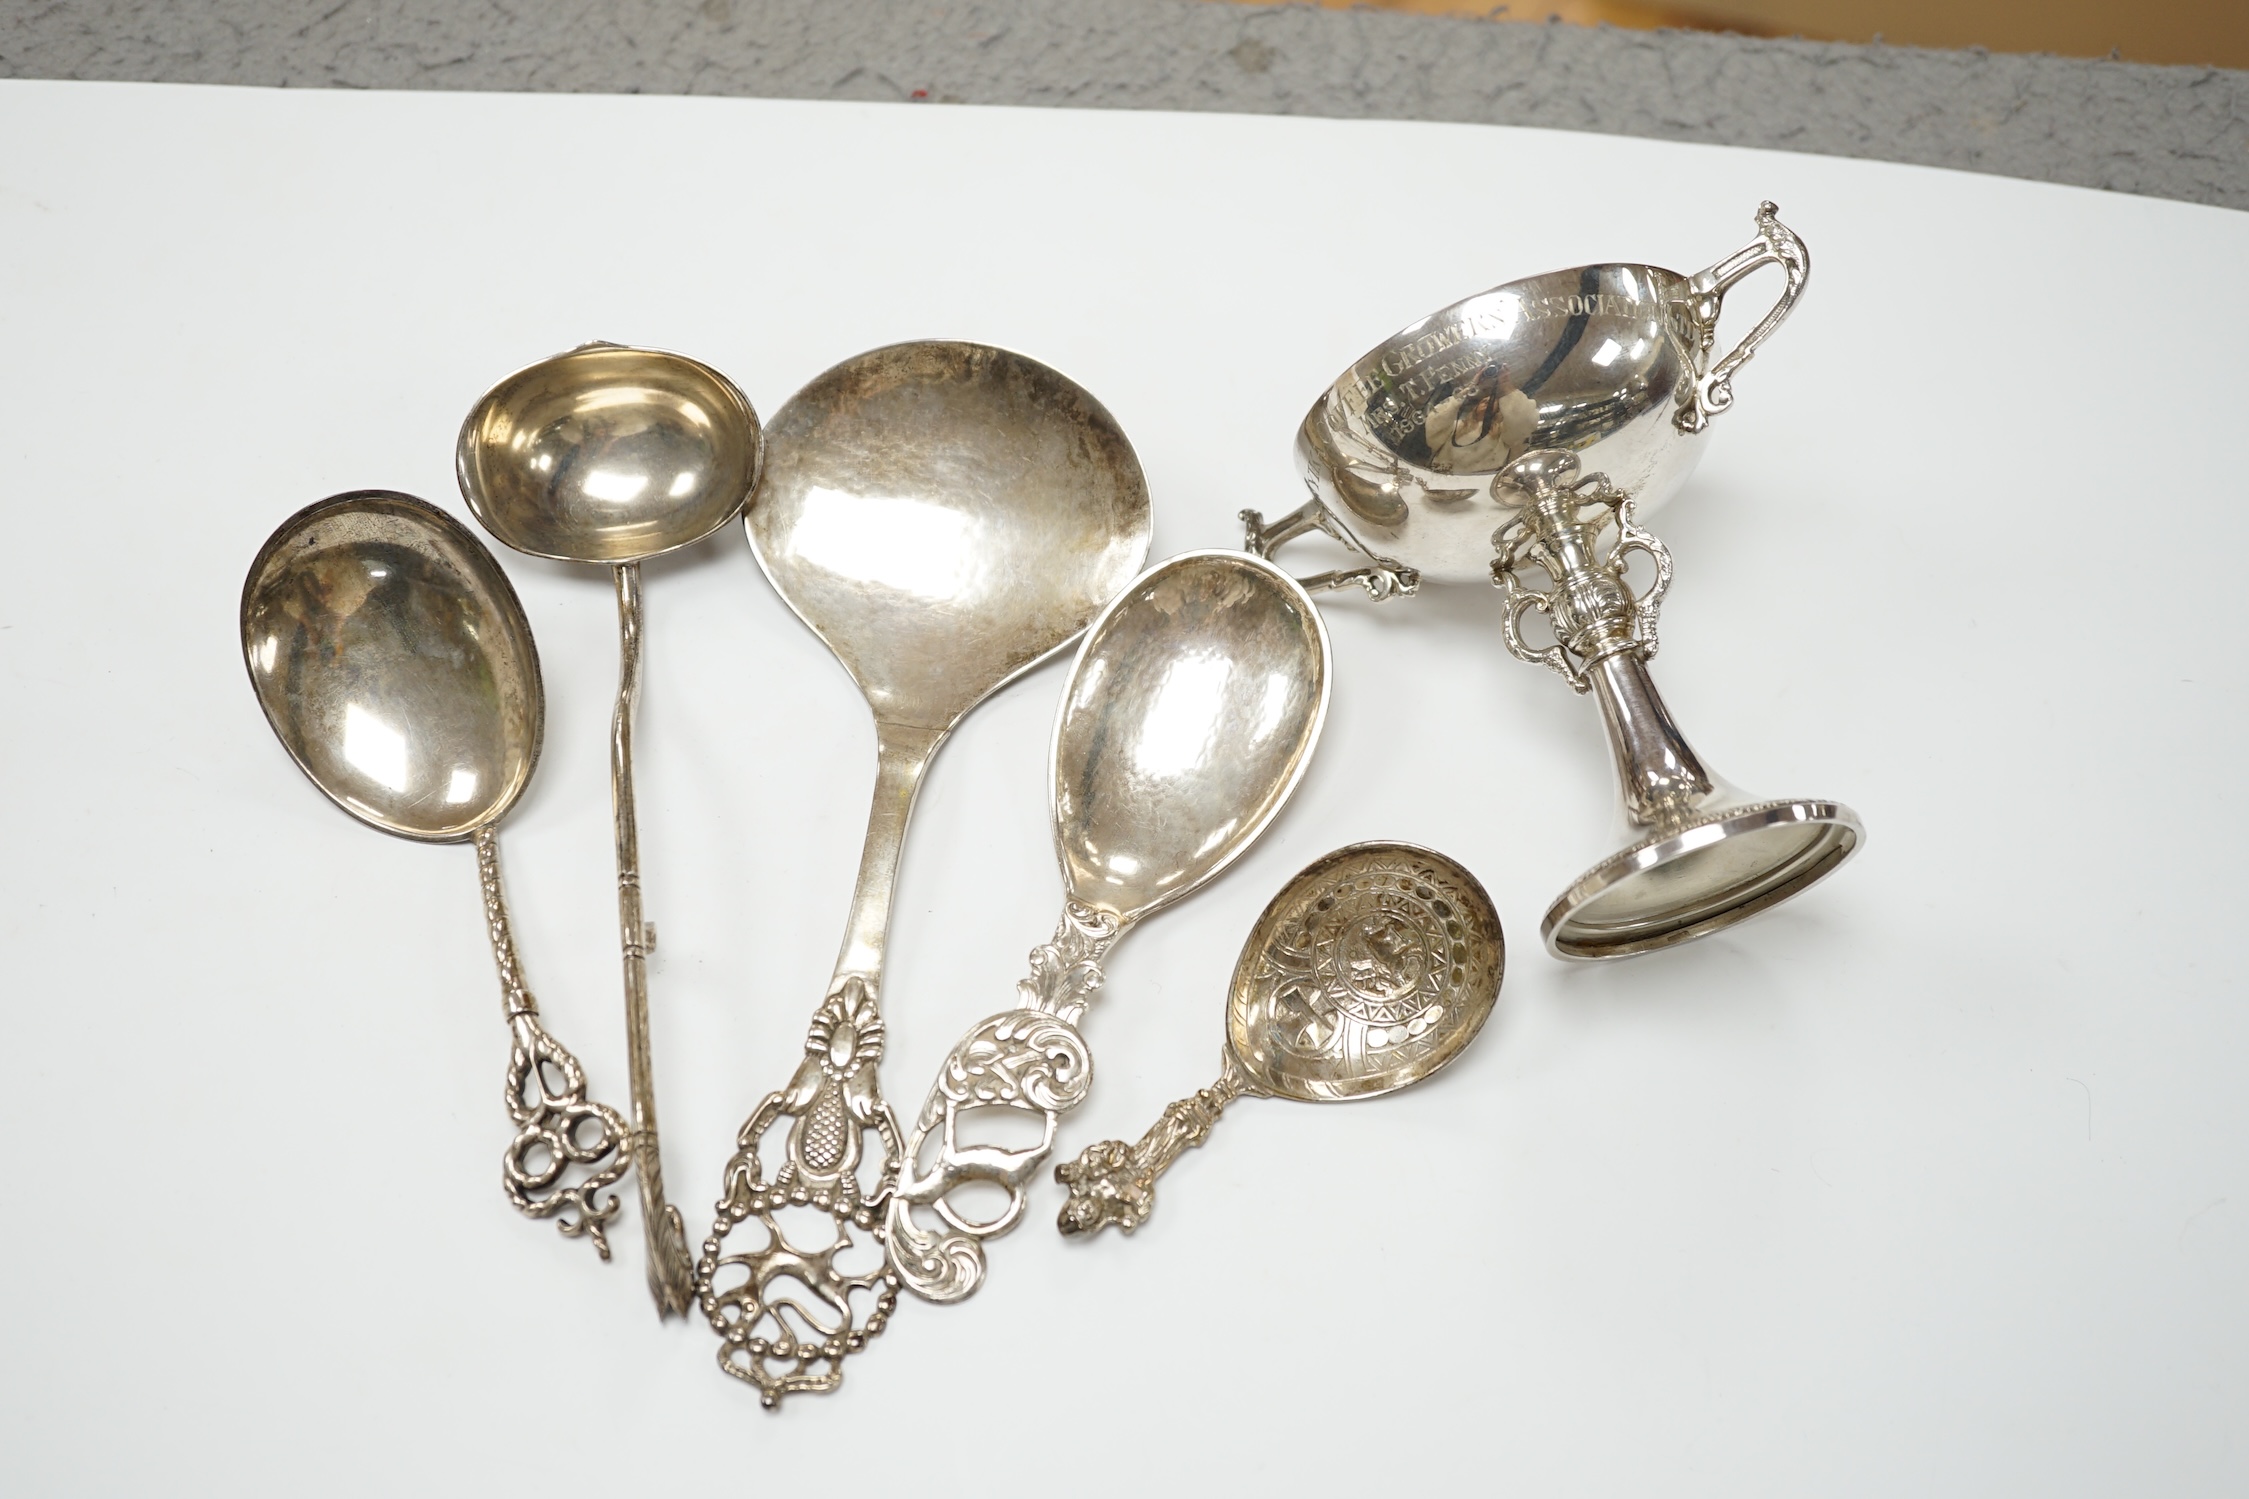 Five assorted early to mid 20th century Danish 830S spoons, largest 21.1cm, together with an Elizabeth II silver two handled presentation trophy cup with engraved inscription relating to the 'Tanganyika Coffee Growers As